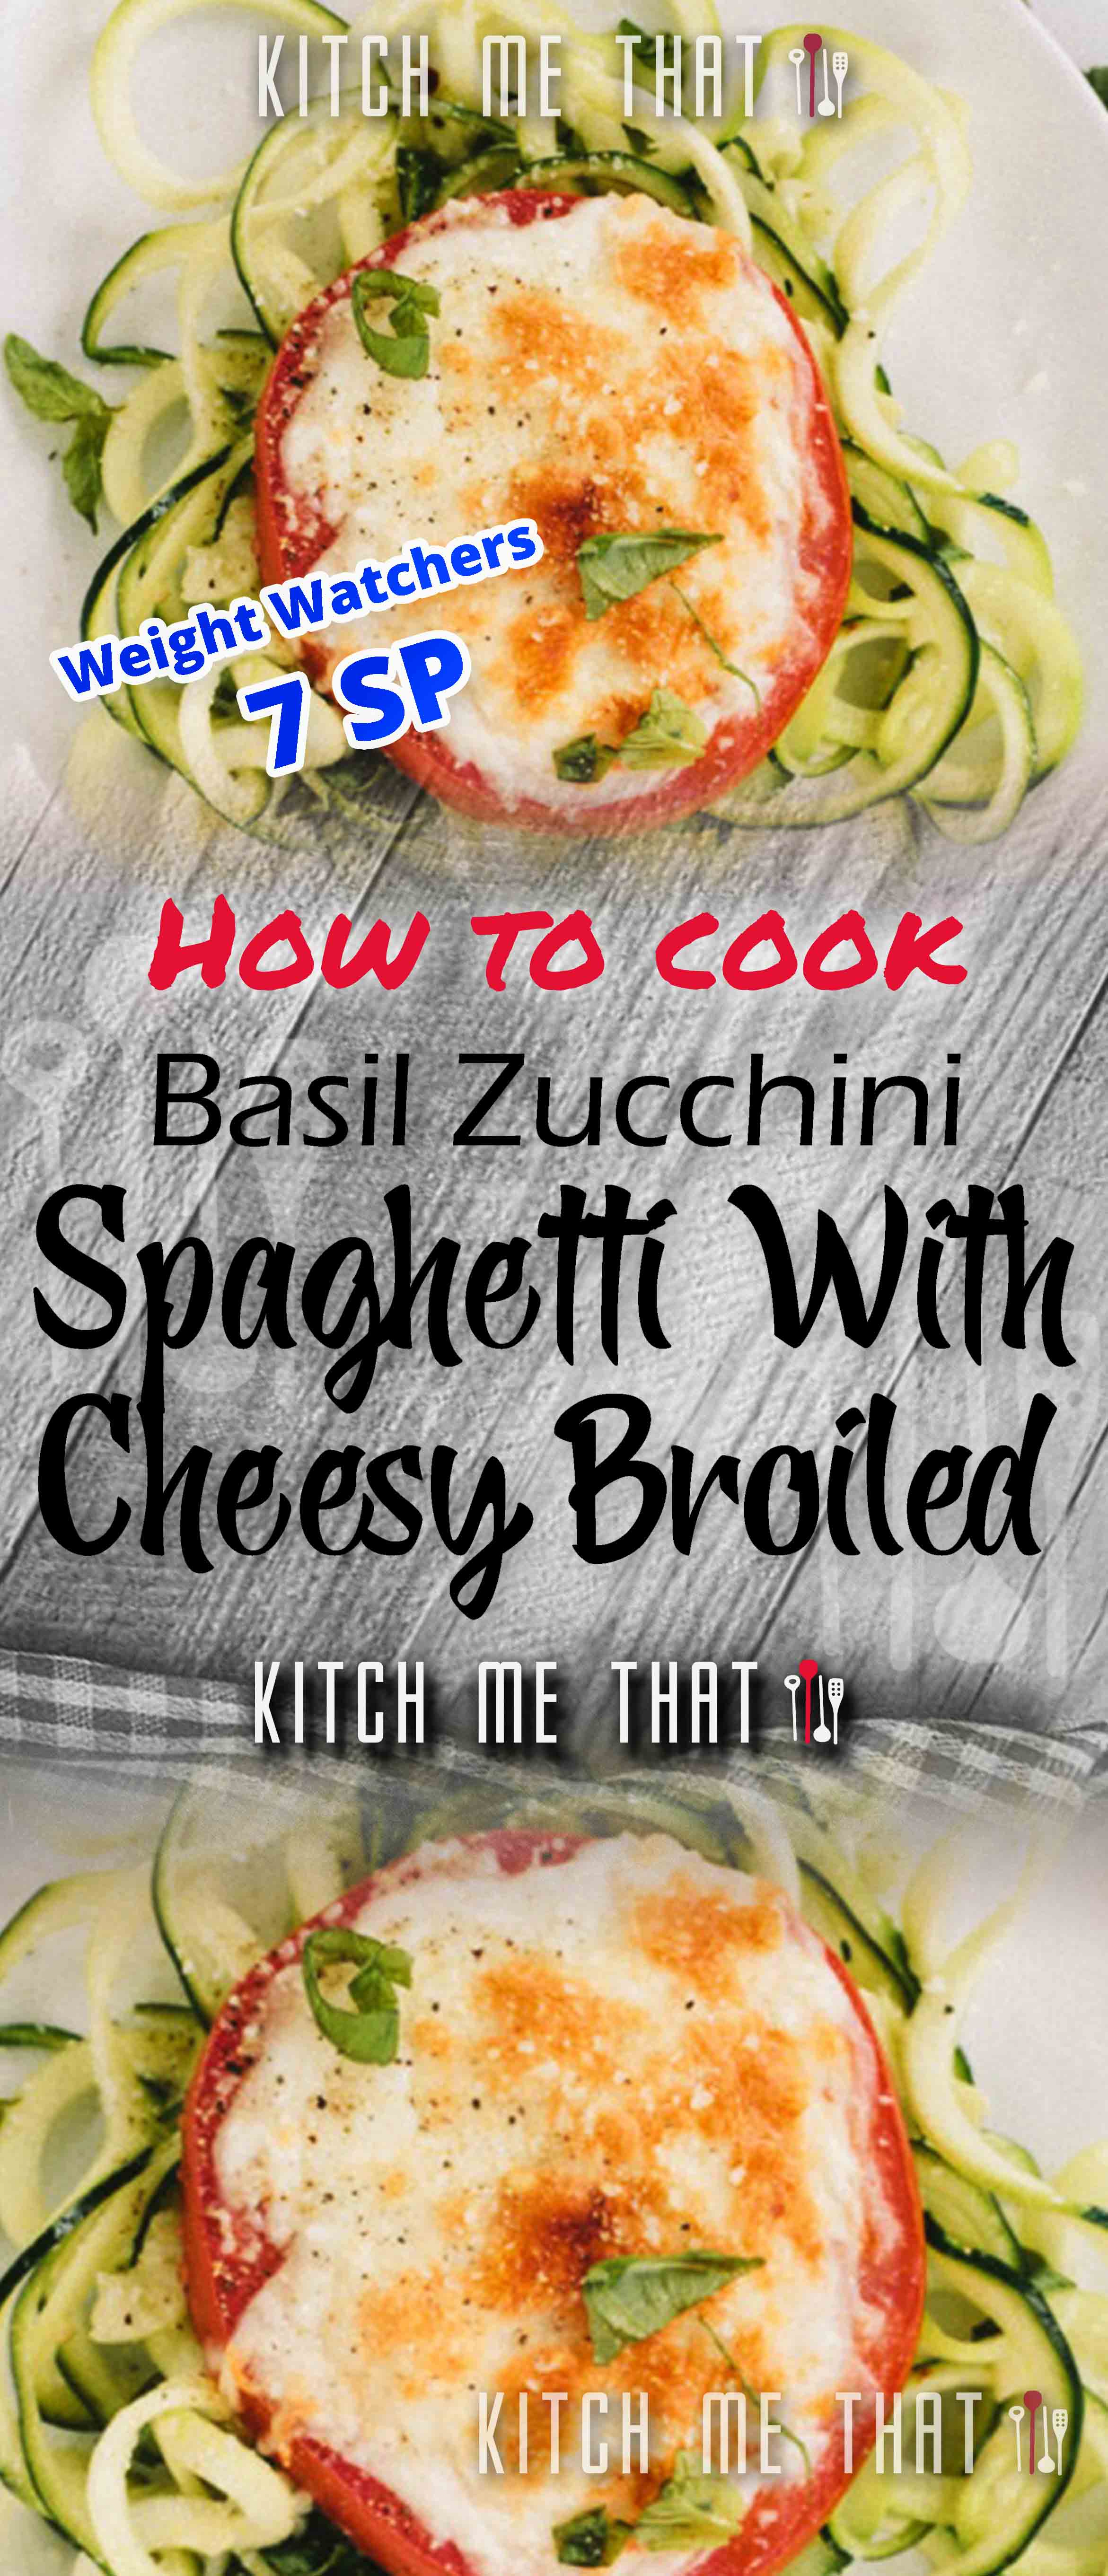 Exclusive Basil Zucchini Spaghetti With Cheesy Broiled Tomatoes NEW 2021